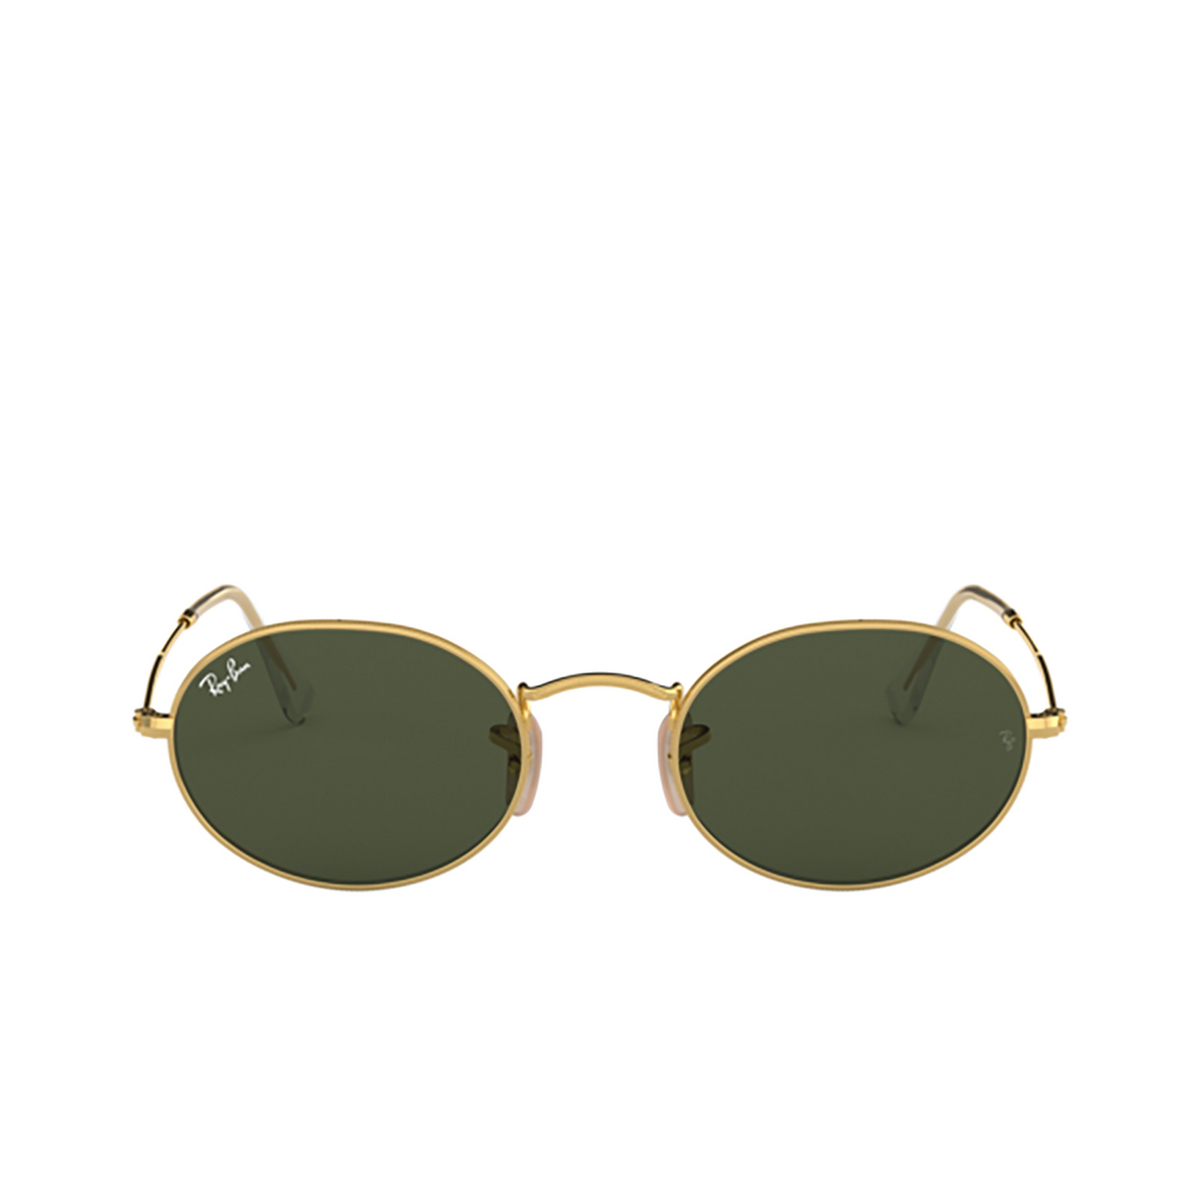 Ray-Ban OVAL Sunglasses 001/31 ARISTA - front view